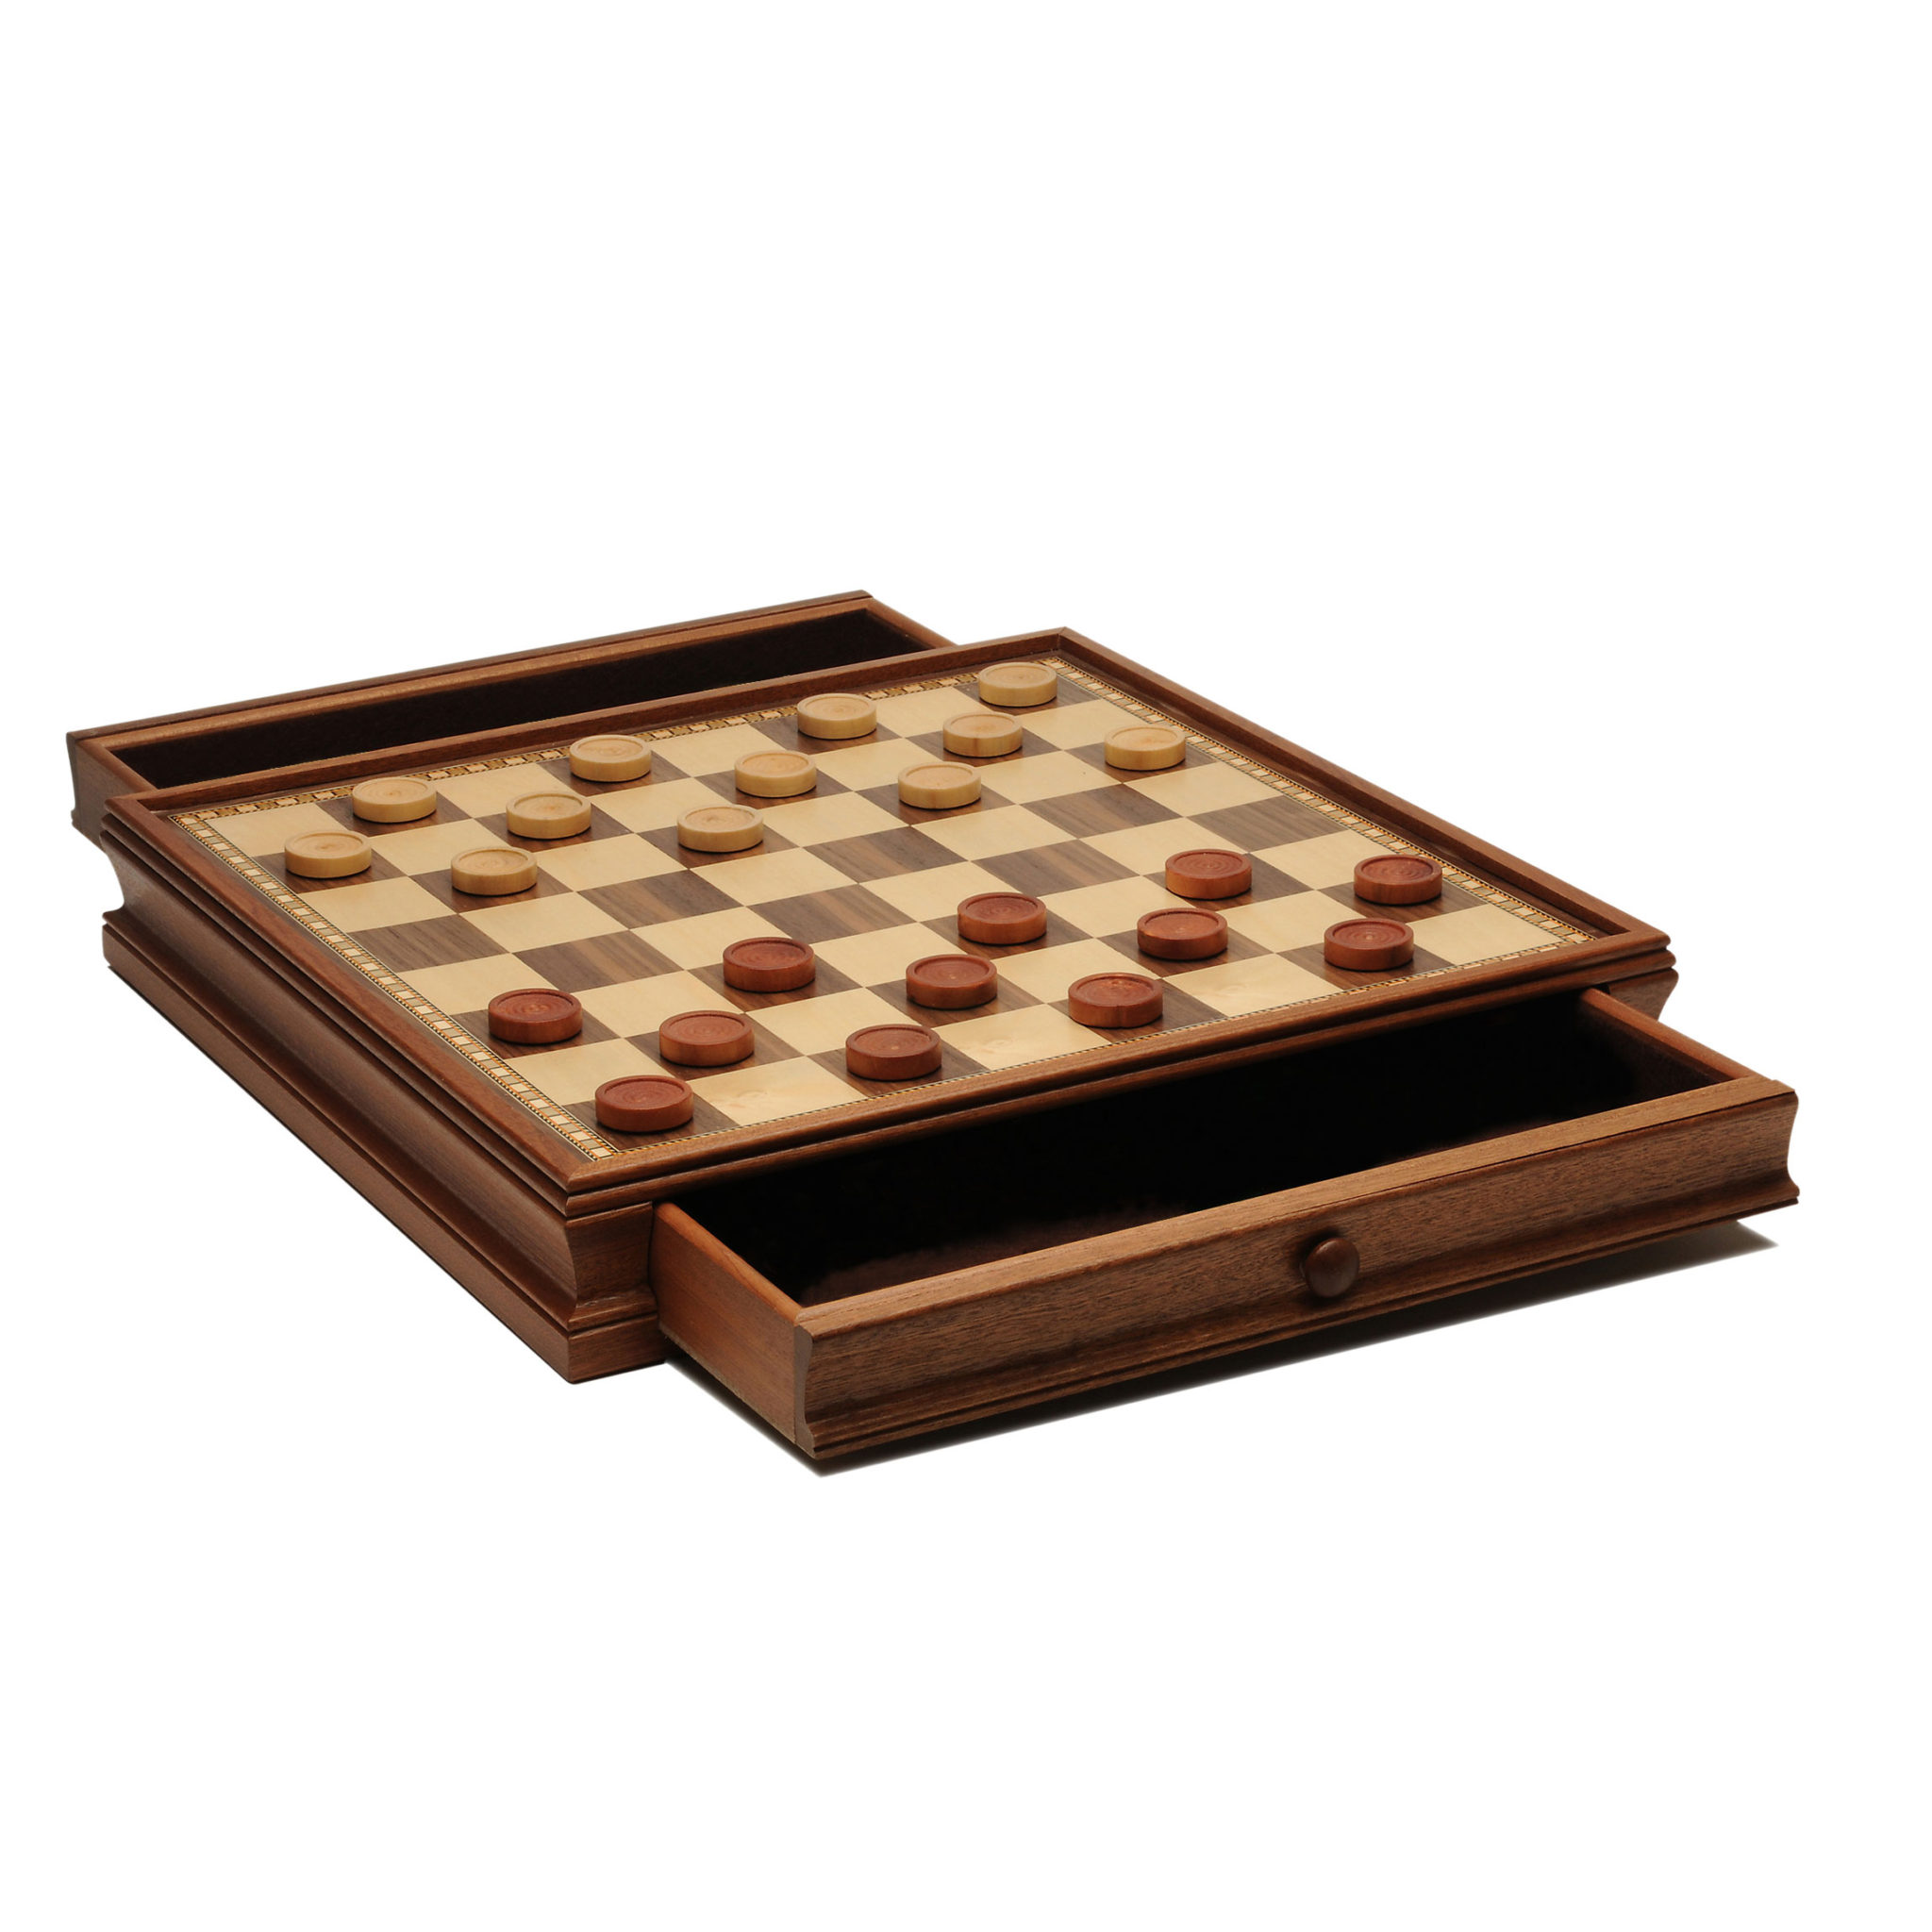 WE Games French Staunton Chess Pieces, Weighted Wood Pieces, 3. in. King, 1  unit - Harris Teeter